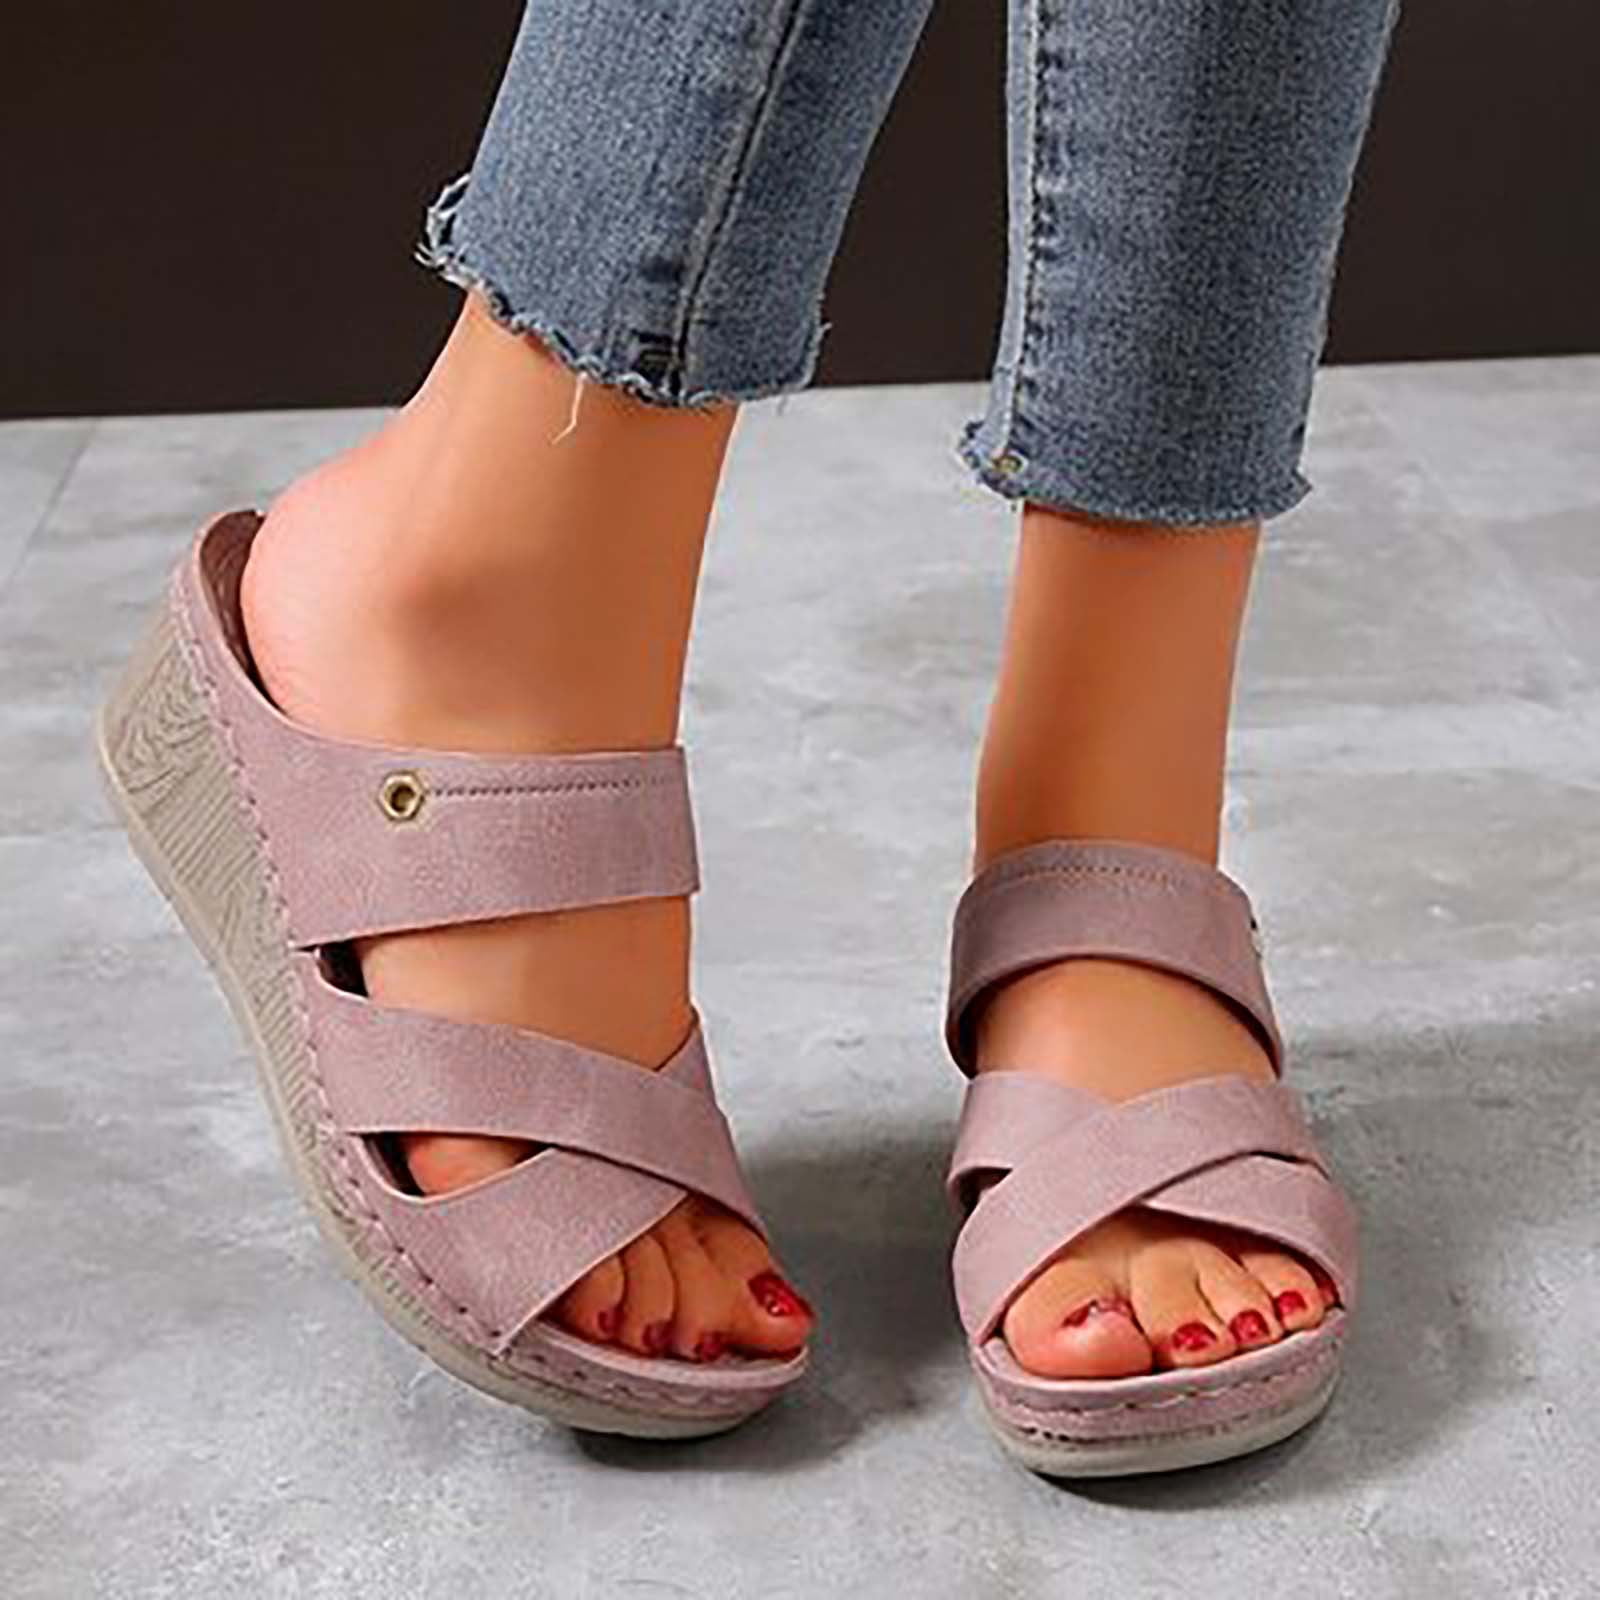 SHIBEVER Leather Slipper Summer Comfortable Vintage Casual Beach Open Toe Slip on Mules Wedge Sandals